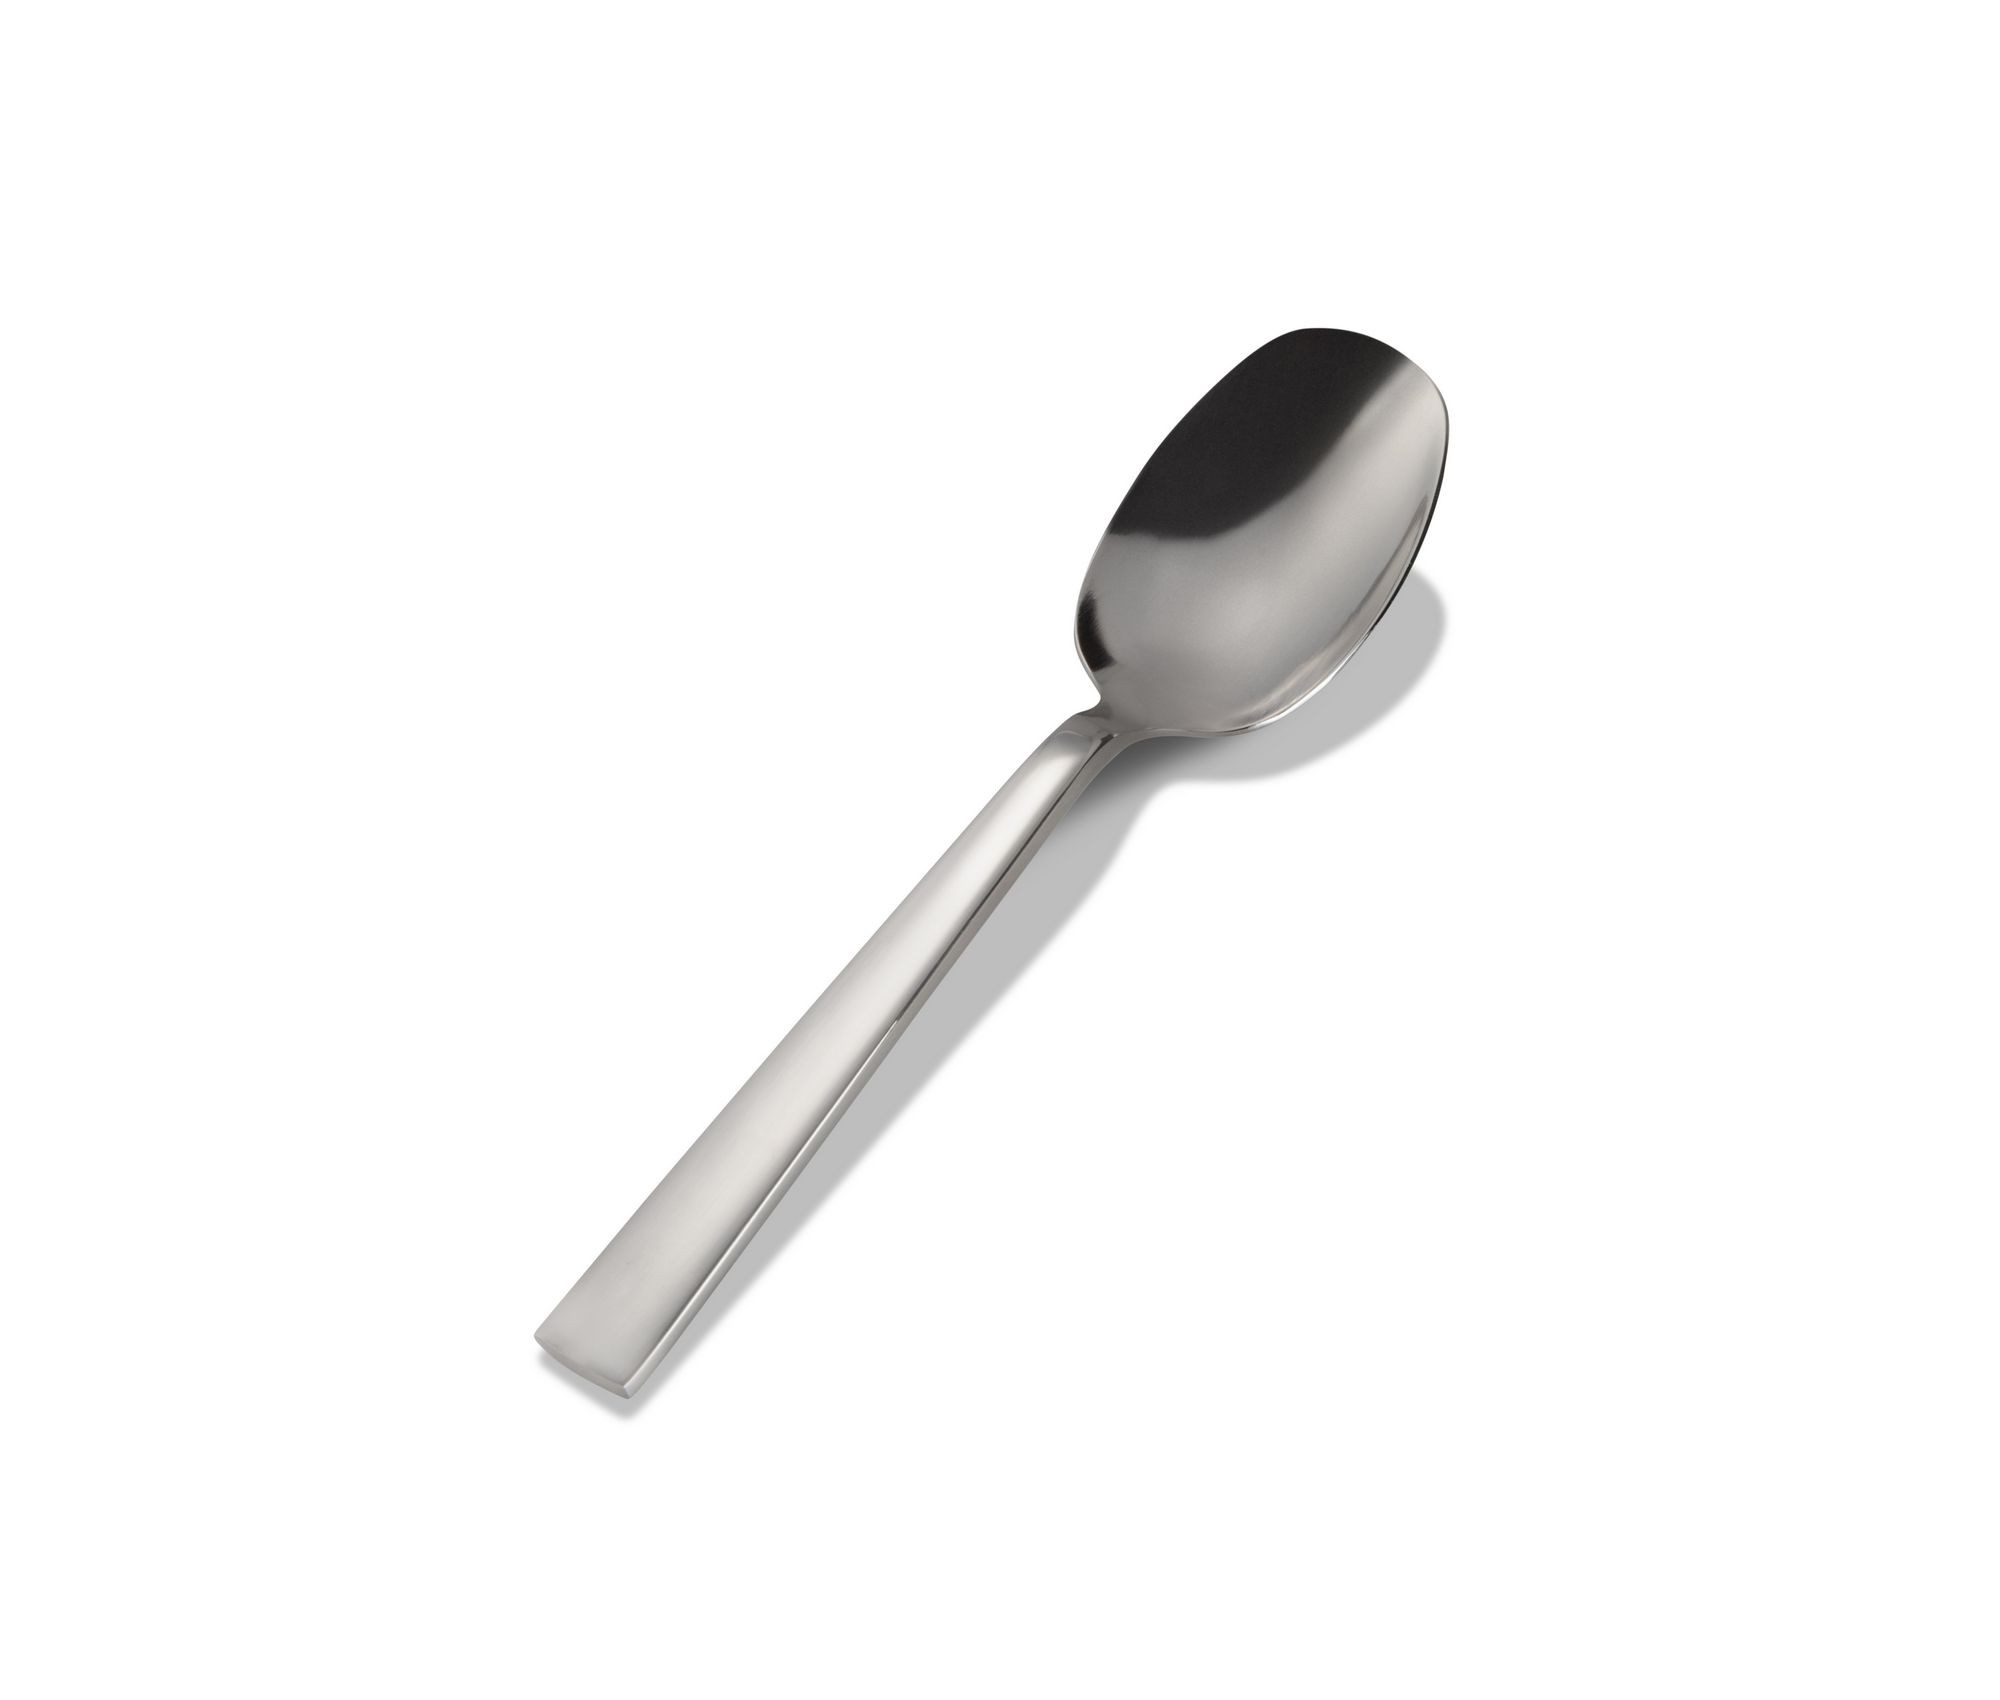 Bon Chef S3703 Roman 18/8 Stainless Steel Soup and Dessert Spoon